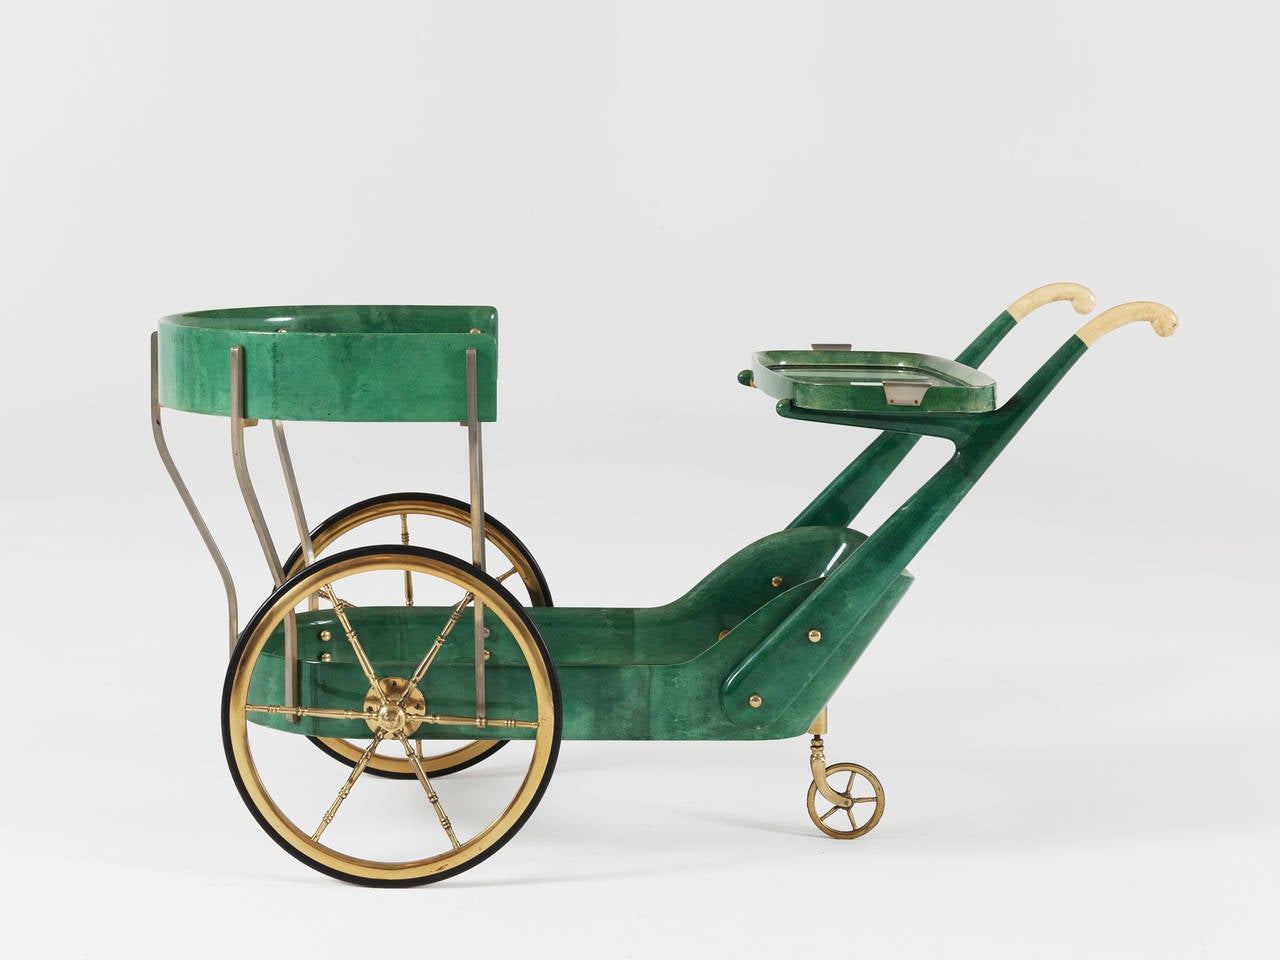 Trolley, in parchment and brass, by Aldo Tura, Italy, 1960s.

Rare Aldo Tura green lacquered parchment liquor trolley with brass details. This trolley is finished with high gloss lacquered goatskin and combined with solid brass parts. One of the